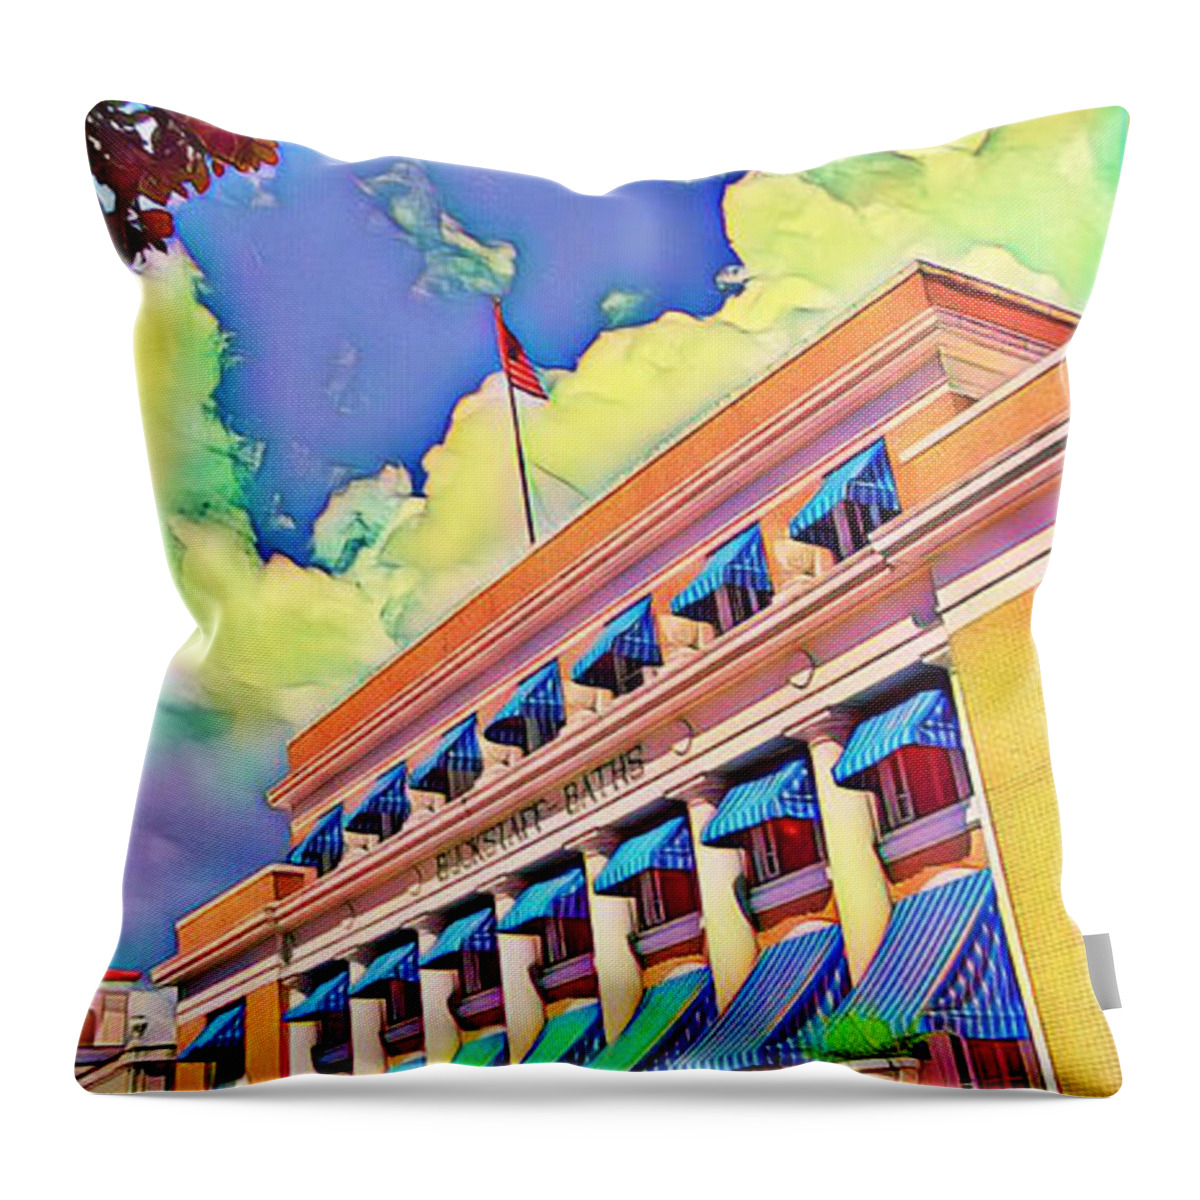  Throw Pillow featuring the painting Manny's Lamar by Emanuel Alvarez Valencia